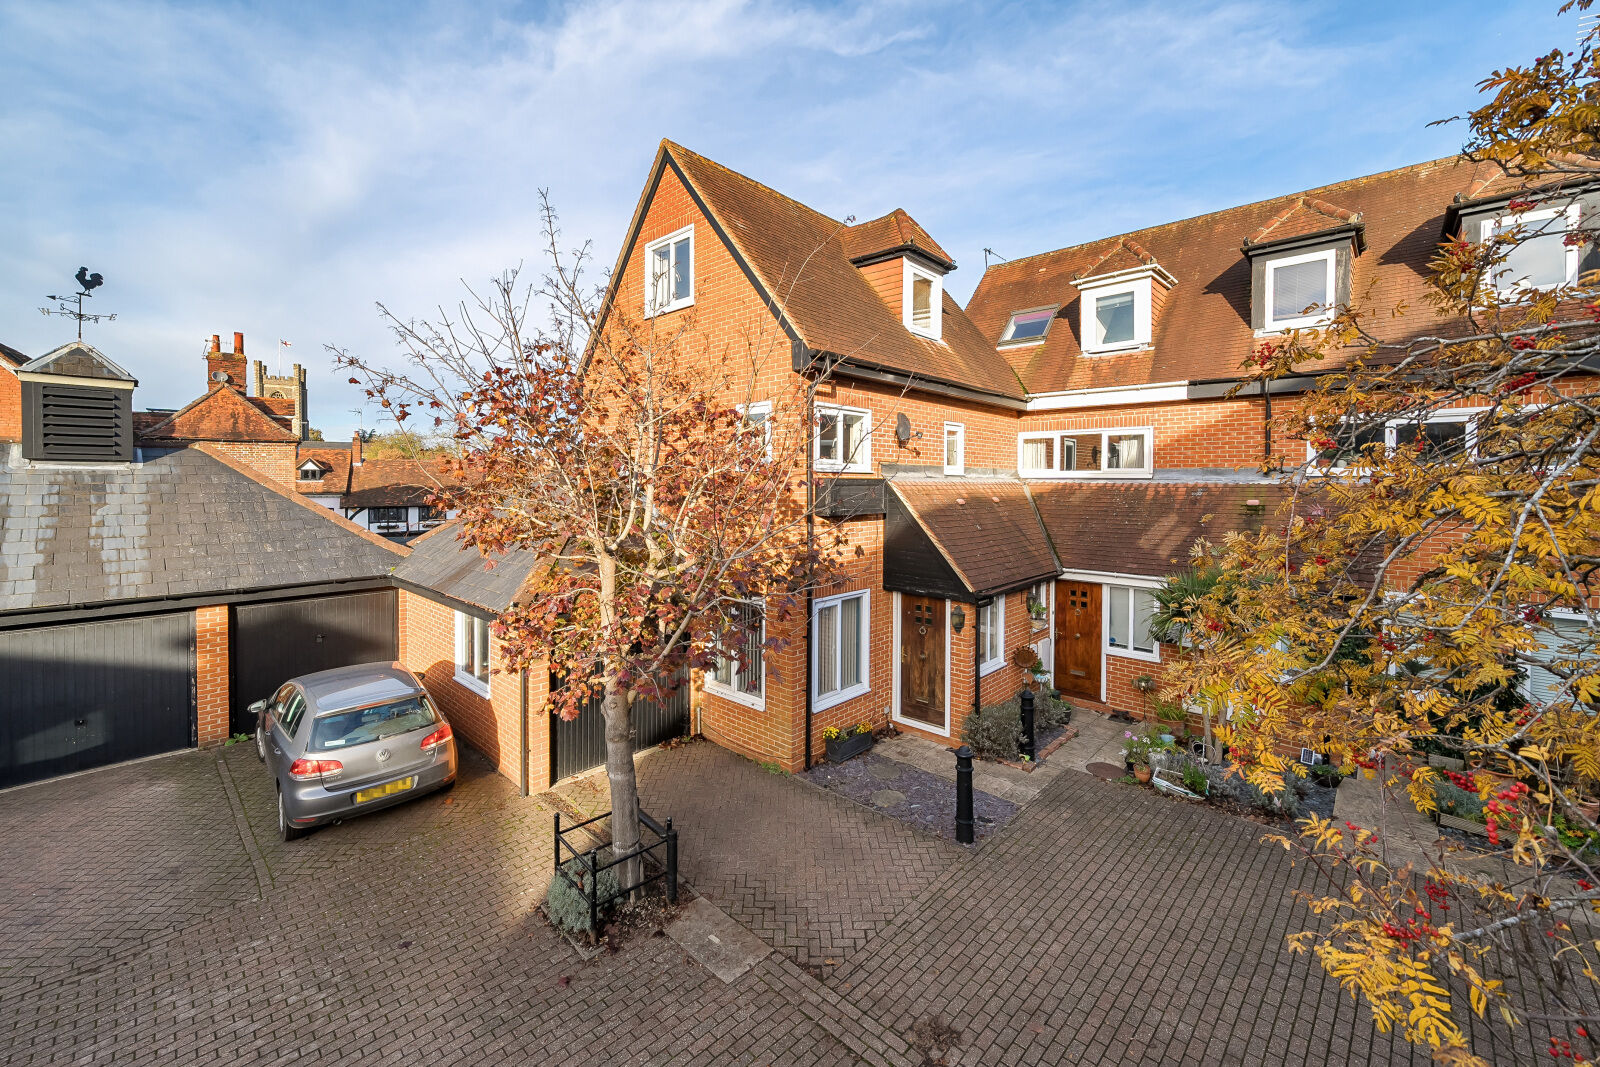 3 bedroom end terraced house for sale Putman Place, Henley-on-Thames, RG9, main image